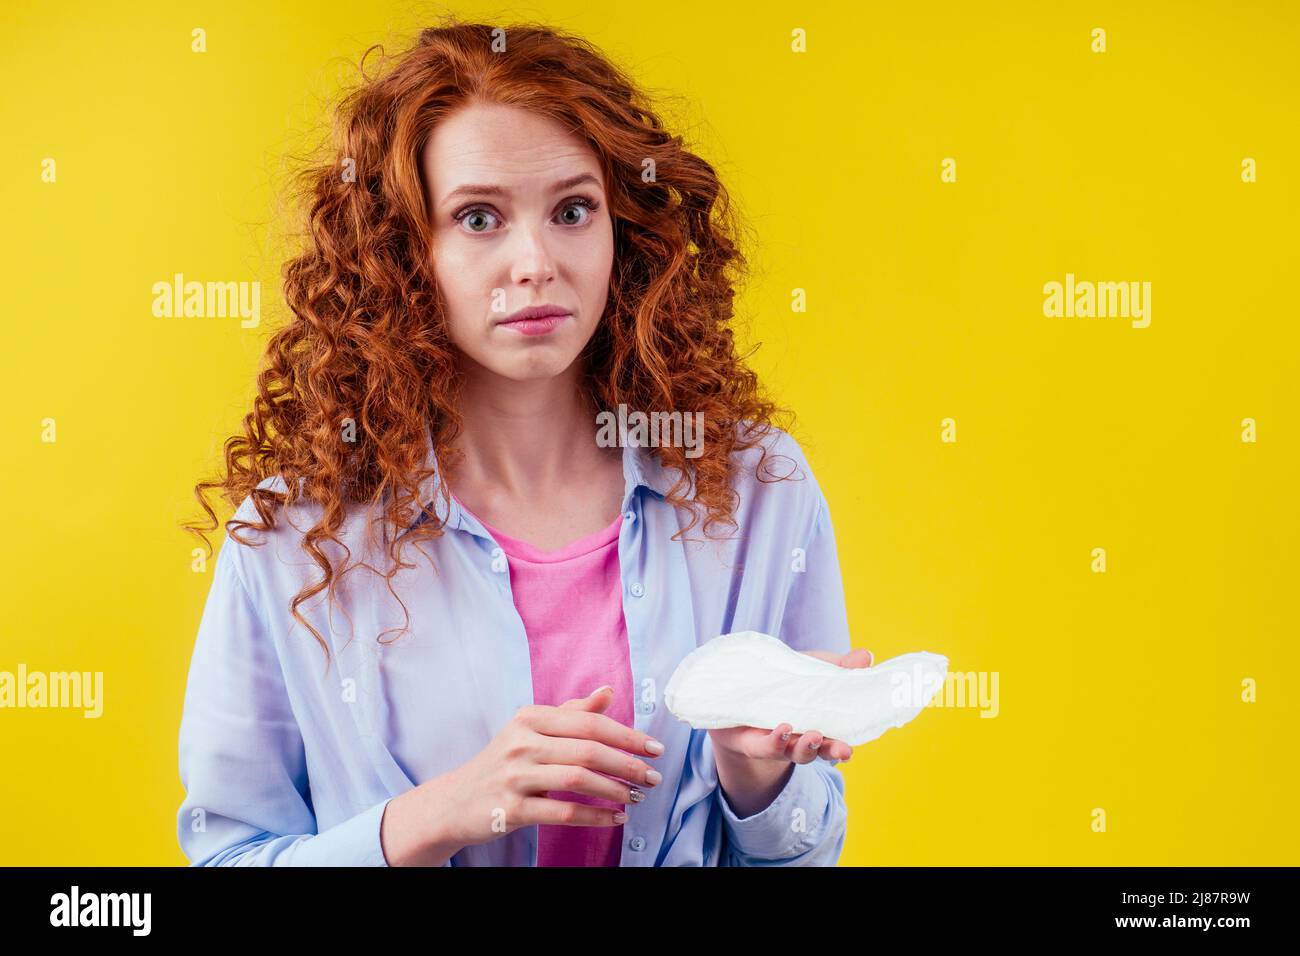 embarrassment redhaired ginger curly woman looking shyness and holding sanitary pads in studio yellow background Stock Photo